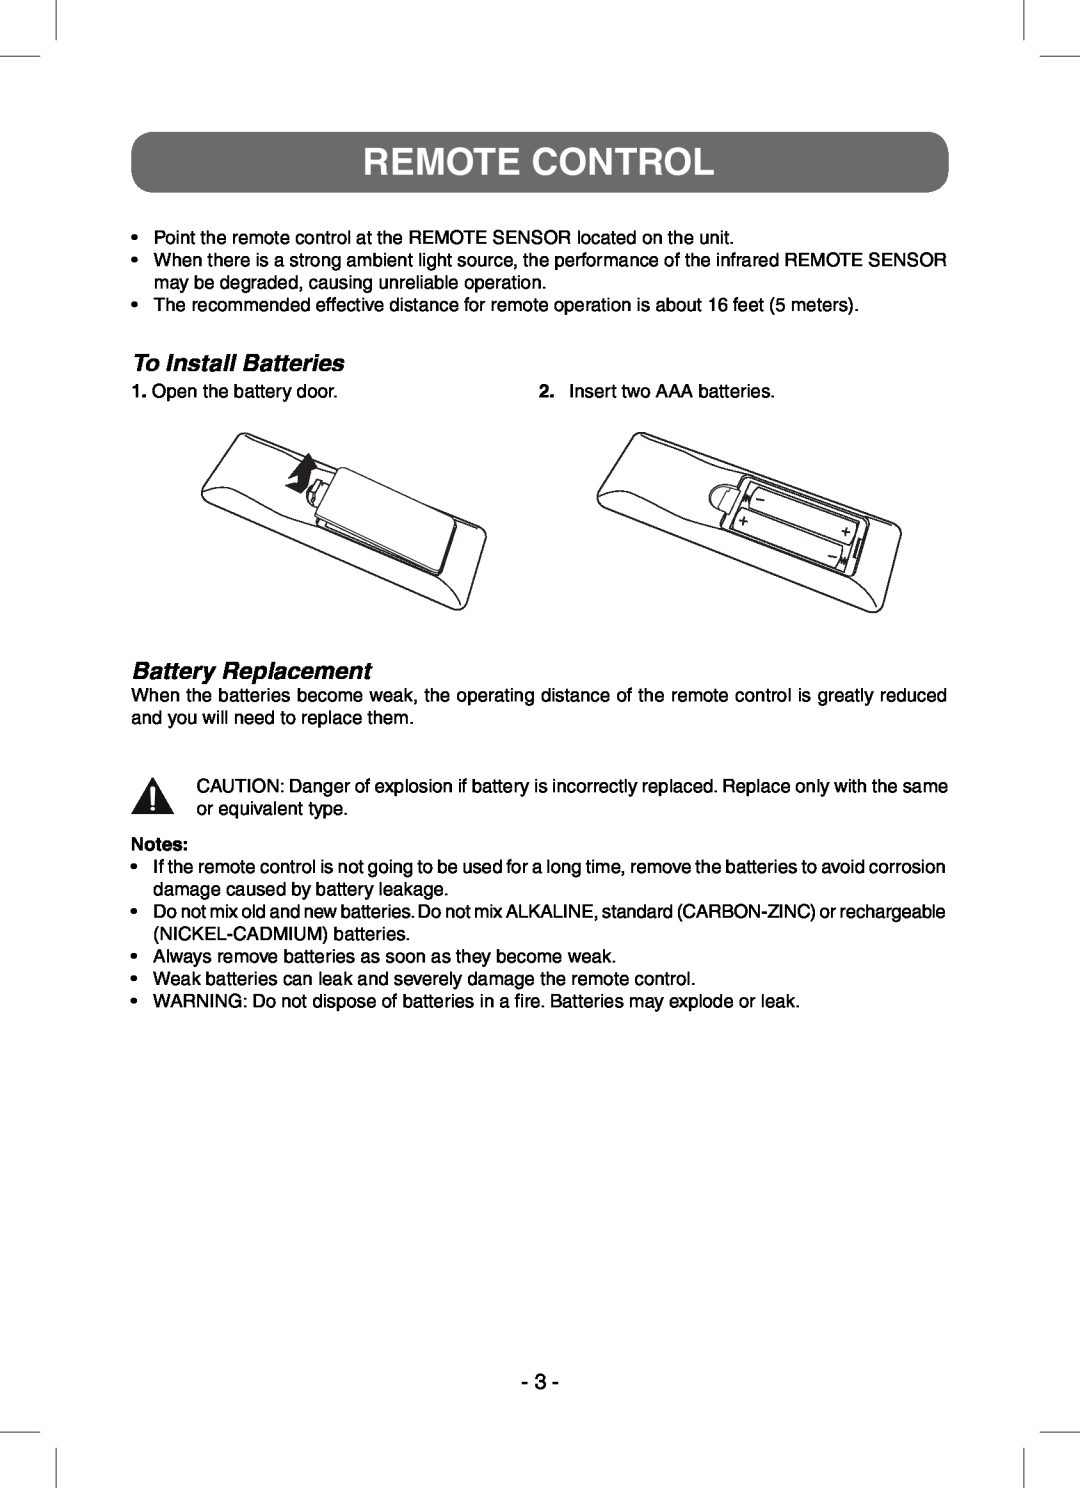 RCA STB7766C user manual Remote Control, To Install Batteries, Battery Replacement 